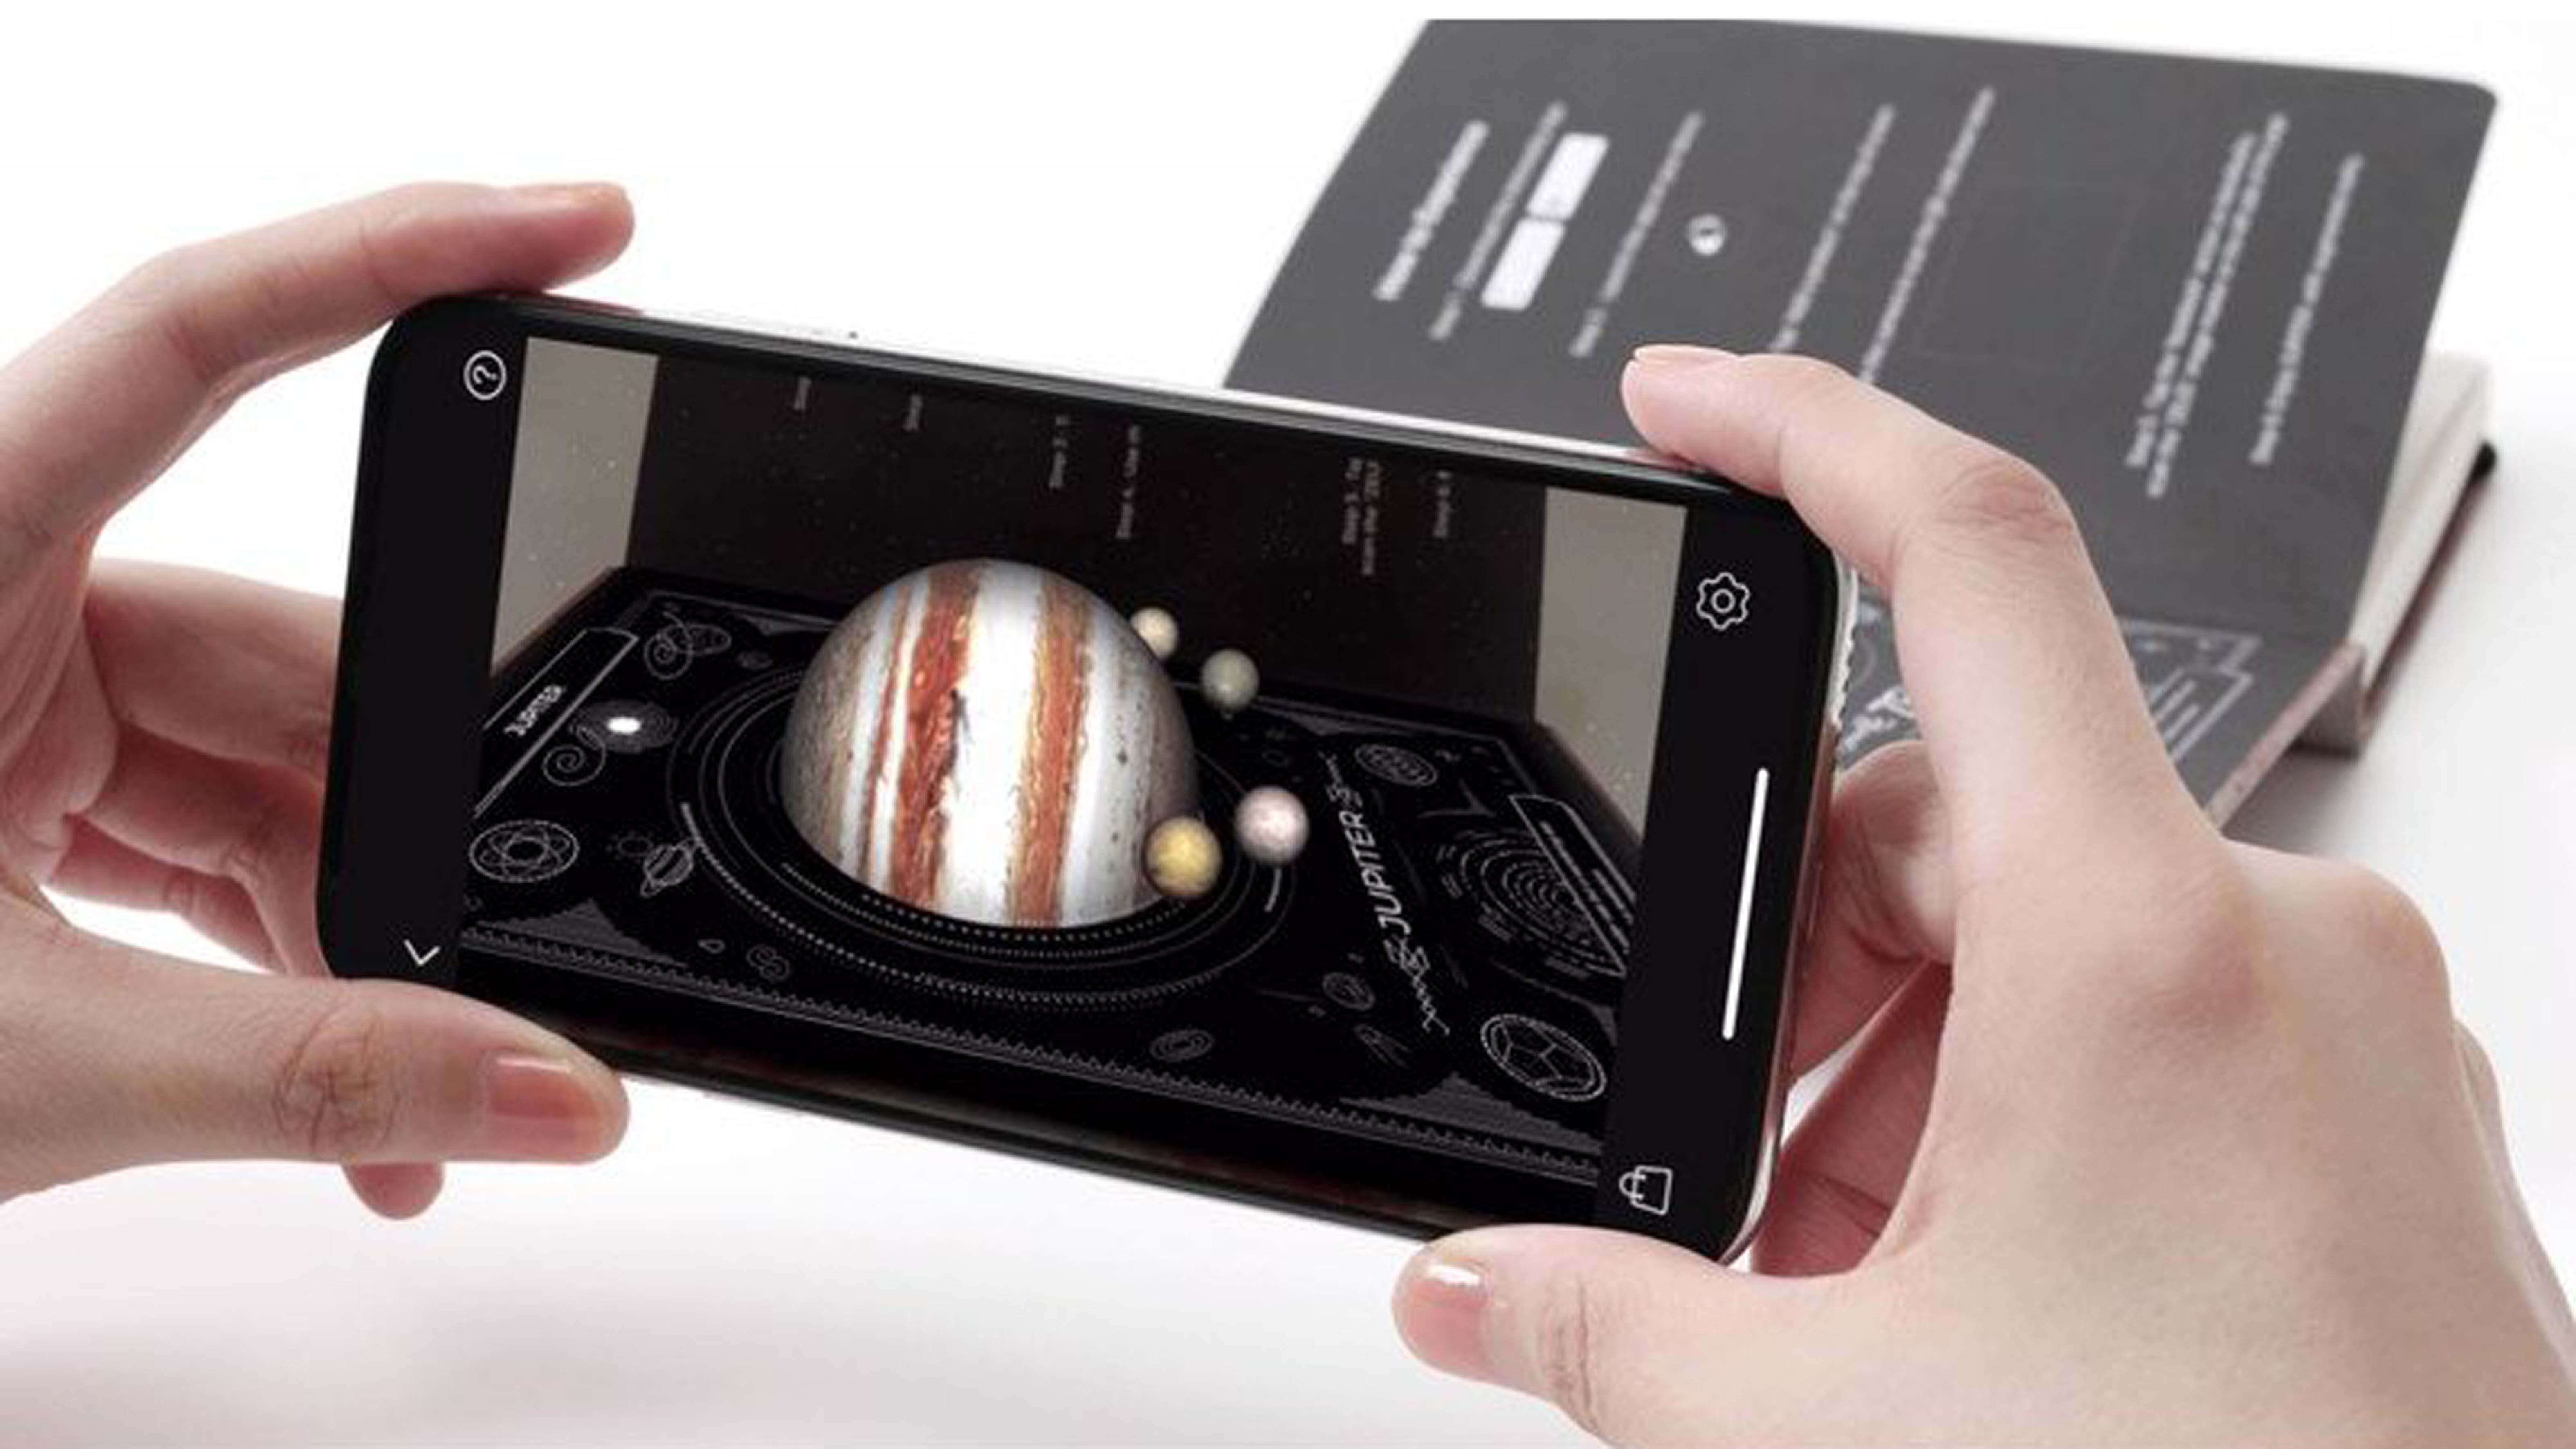 Six interactive gift ideas for hobby astronomers